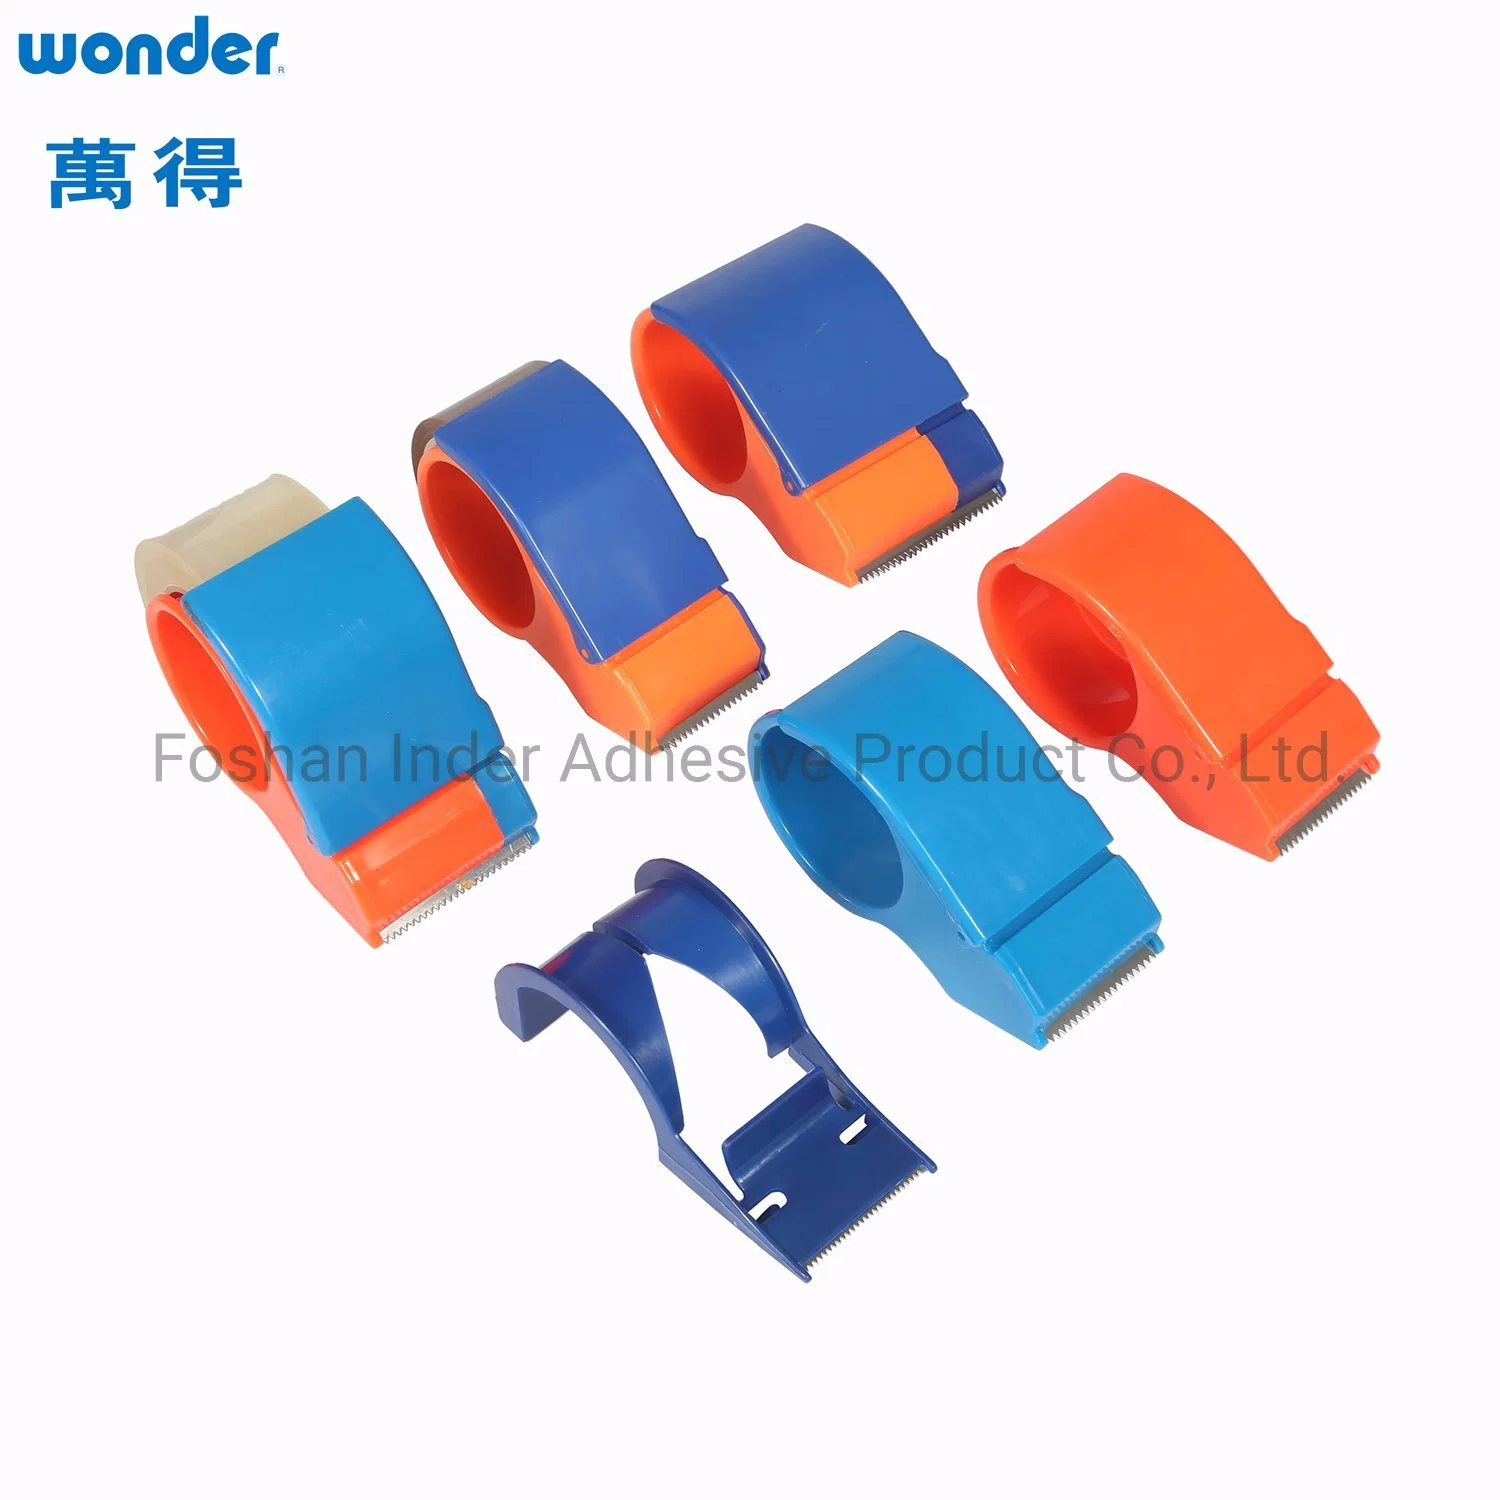 Width 24mm OPP Stationery Tape with Wonder Brand and High quality/High cost performance 